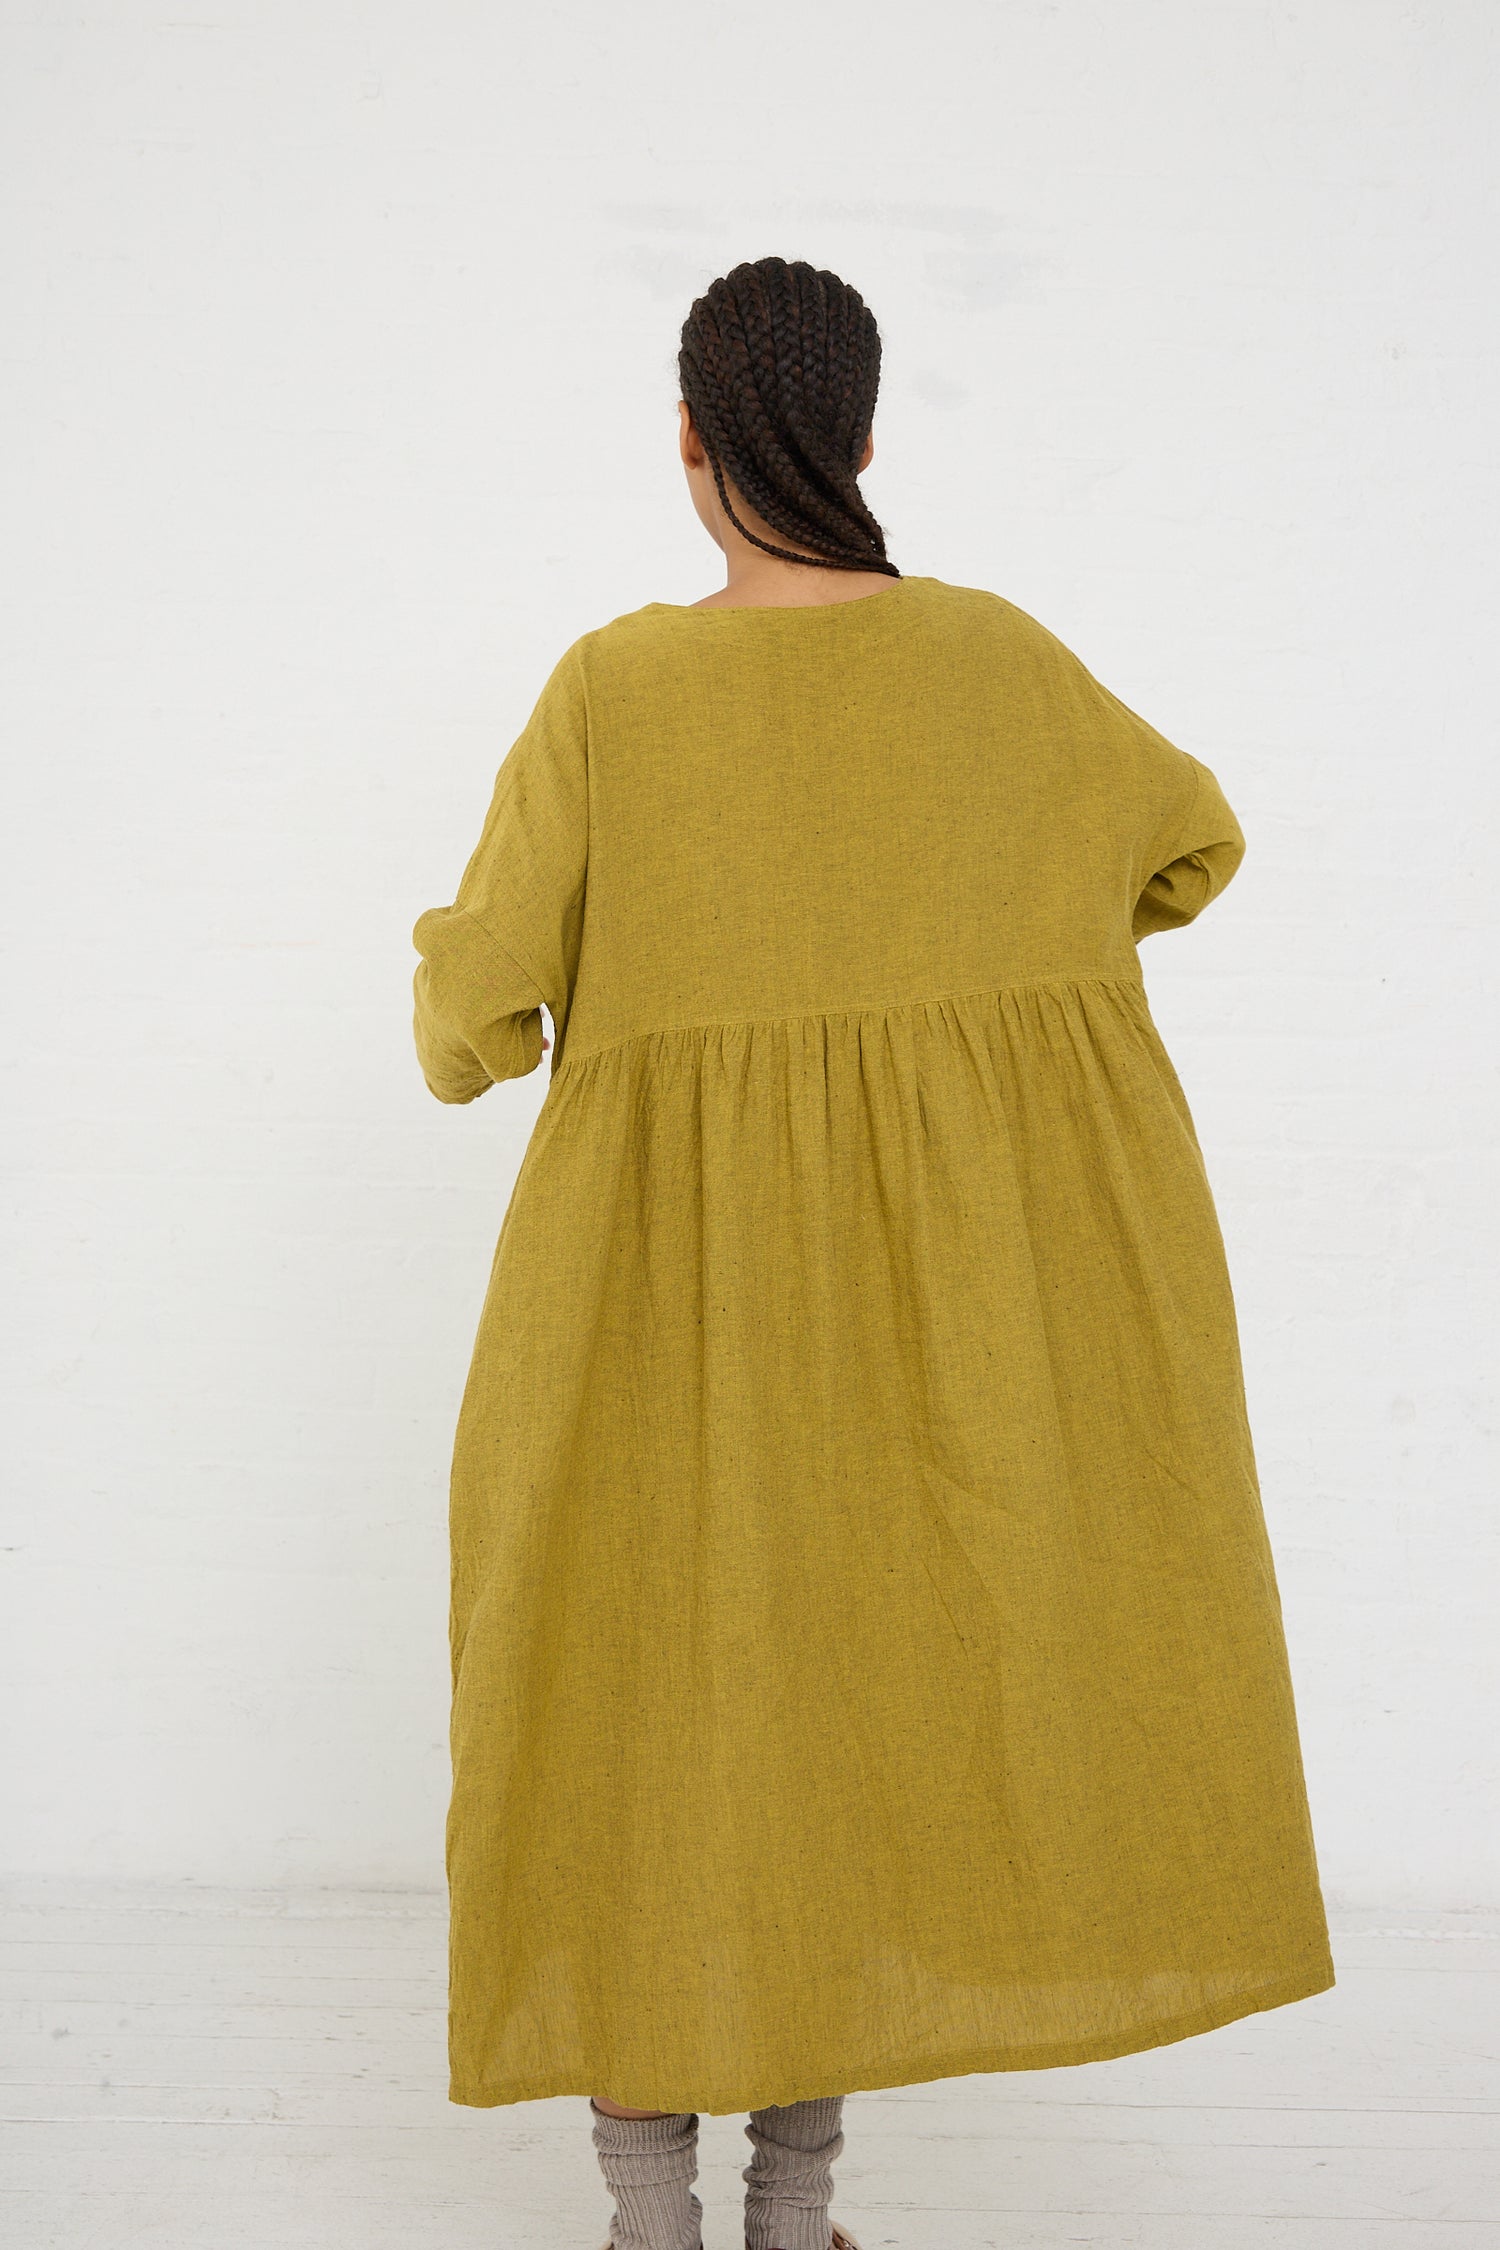 Woman standing with her back to the camera, wearing a Ichi Antiquités Linen Cotton Herringbone Dress in Yellow with gathered waist detail.